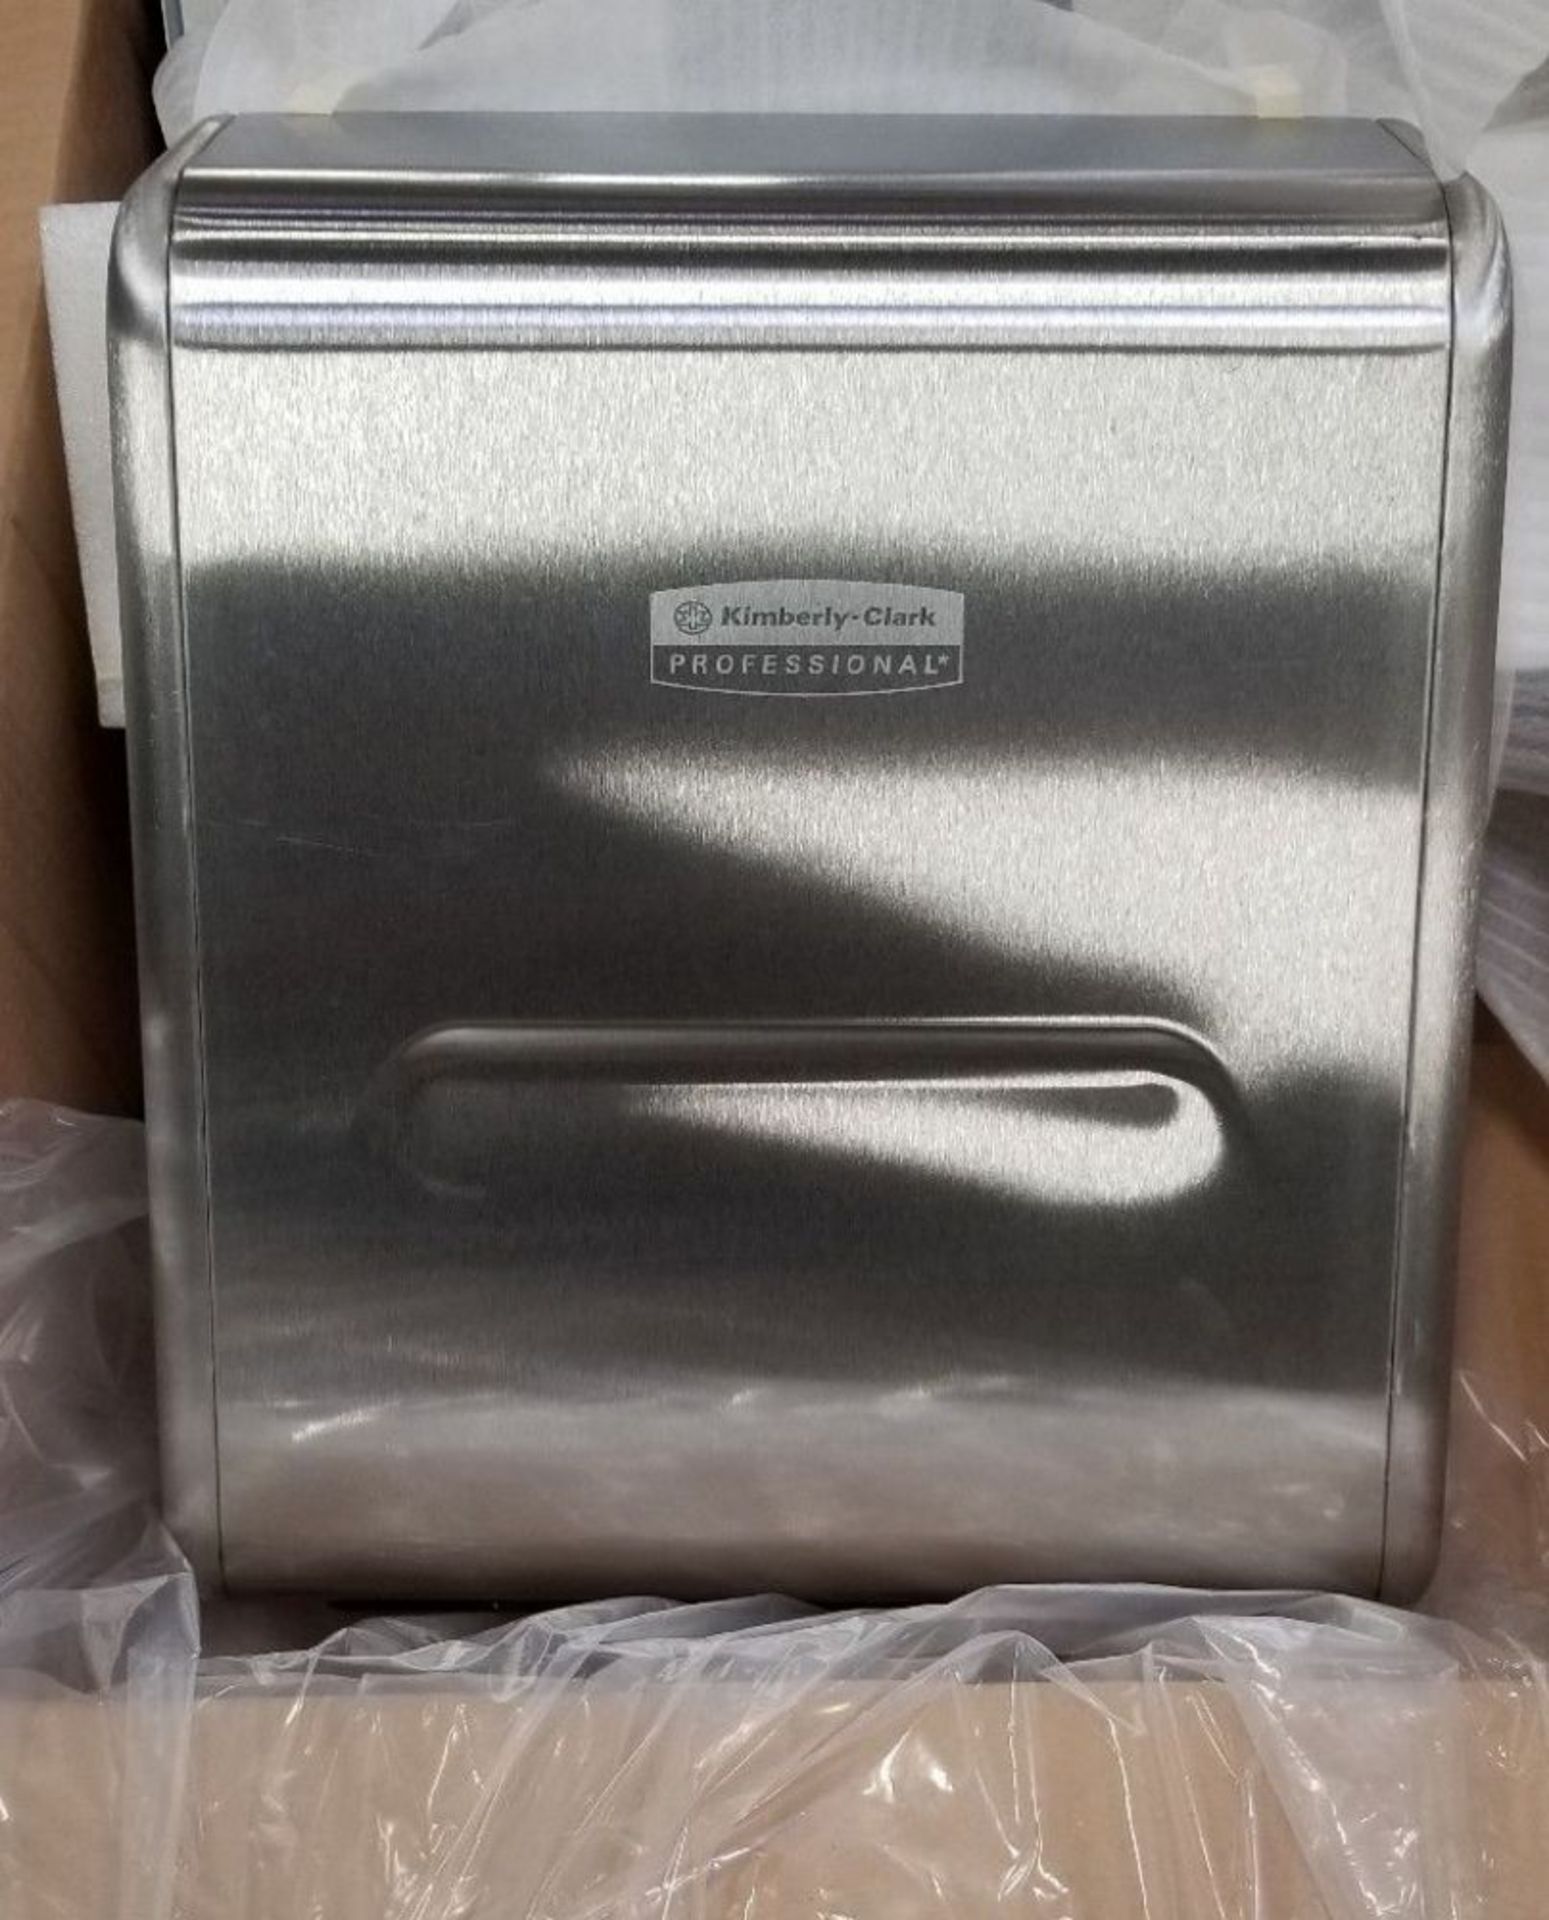 NEW KIMBERLY CLARK STAINLESS STEEL PAPER TOWEL DISPENSER W/TRIM - Image 3 of 3